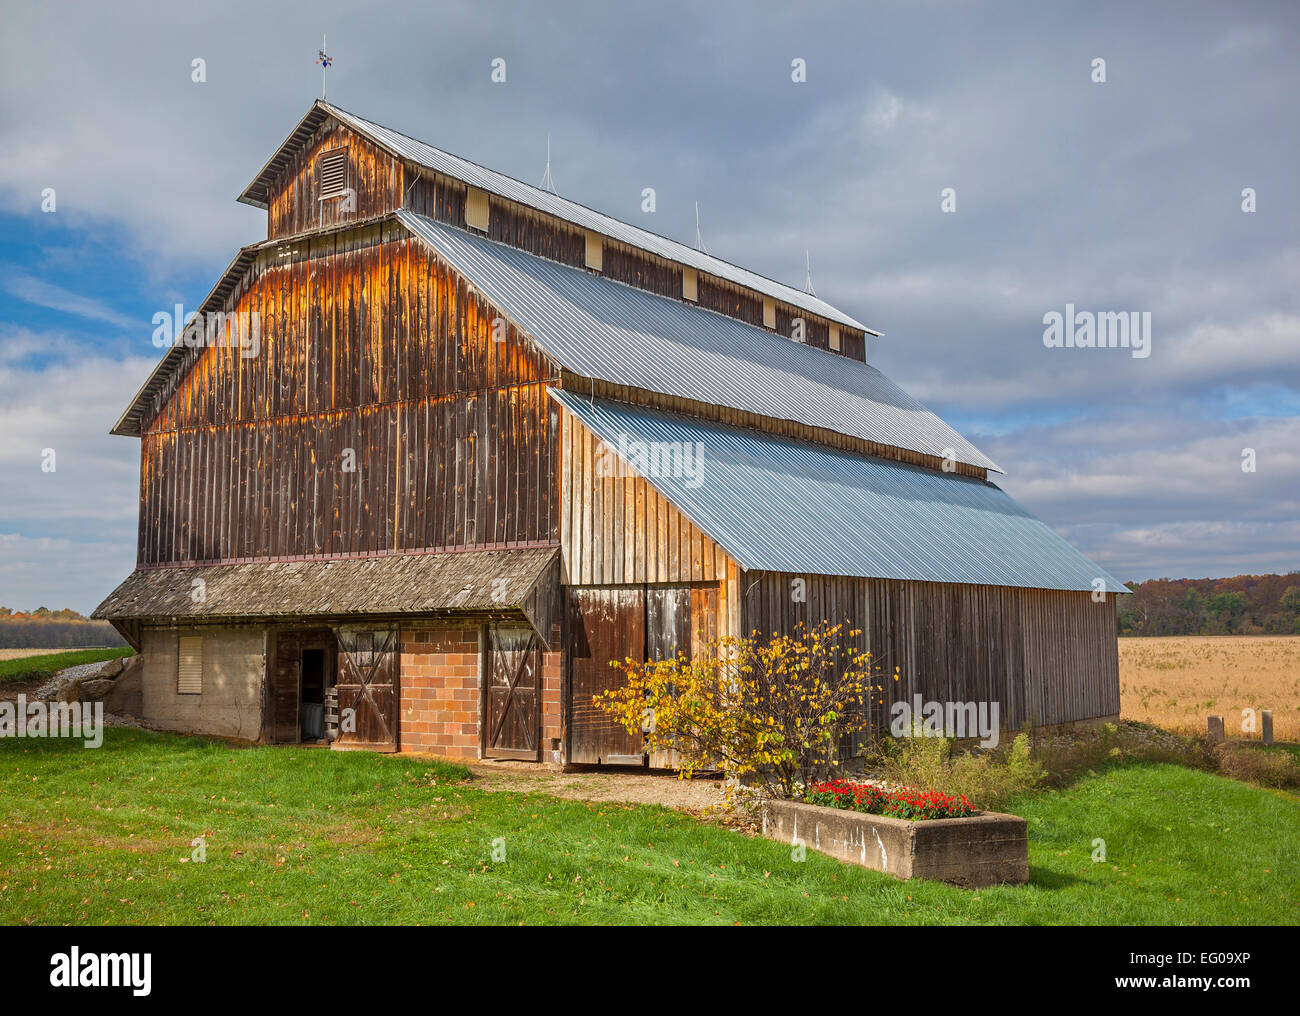 Parke County, IN: Weathered wood barn in fall Stock Photo